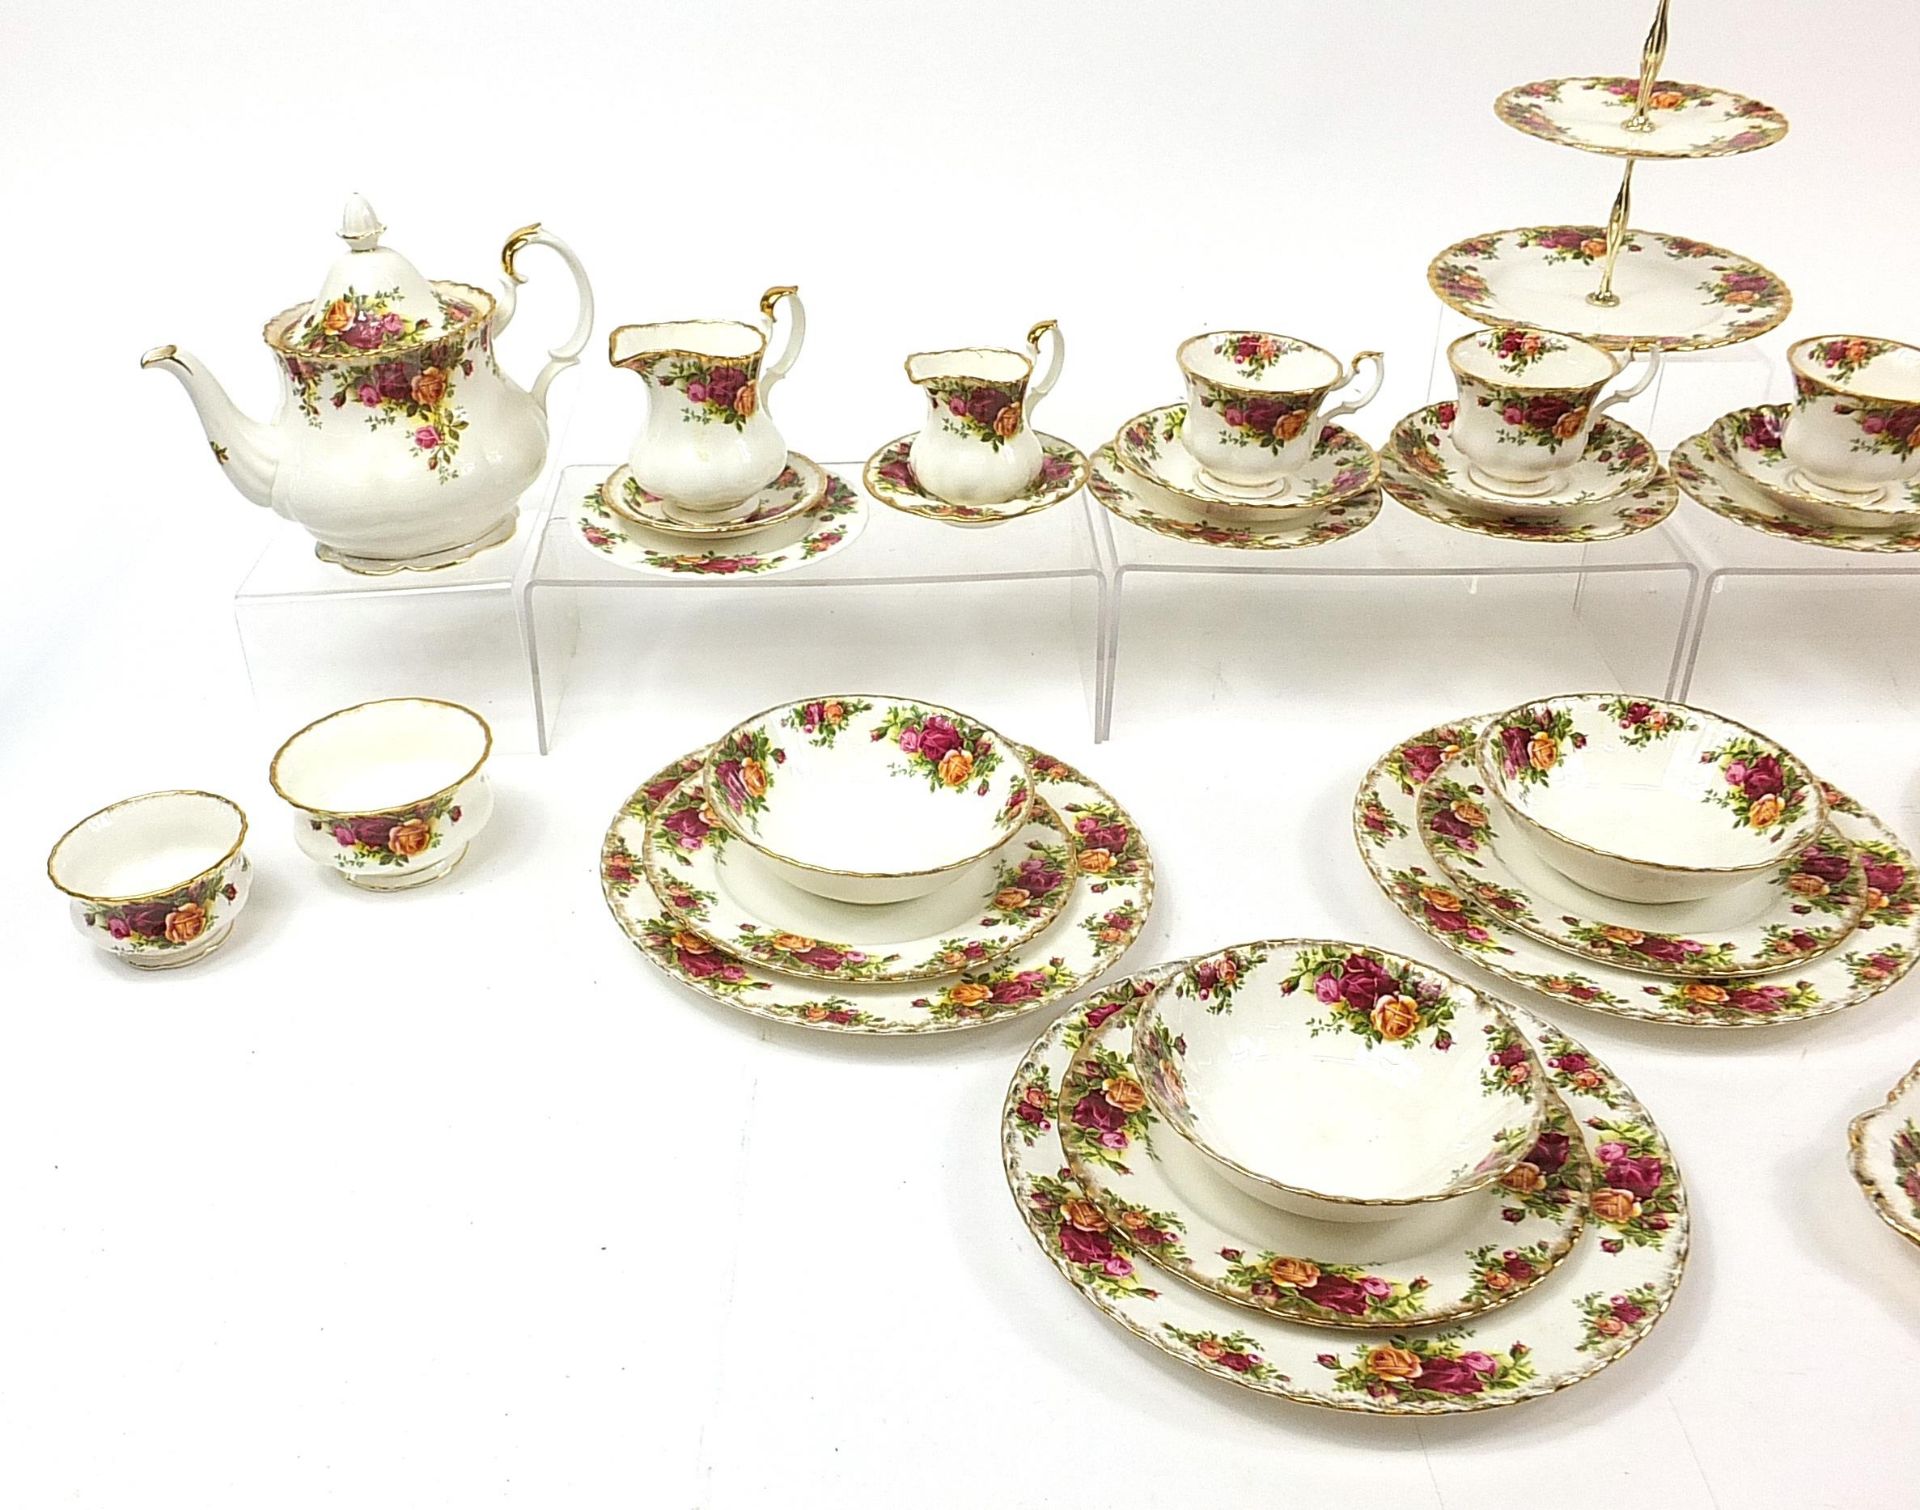 Royal Albert Old Country Roses teaware and dinnerware including teapot, trios, cake stand and dinner - Image 2 of 5